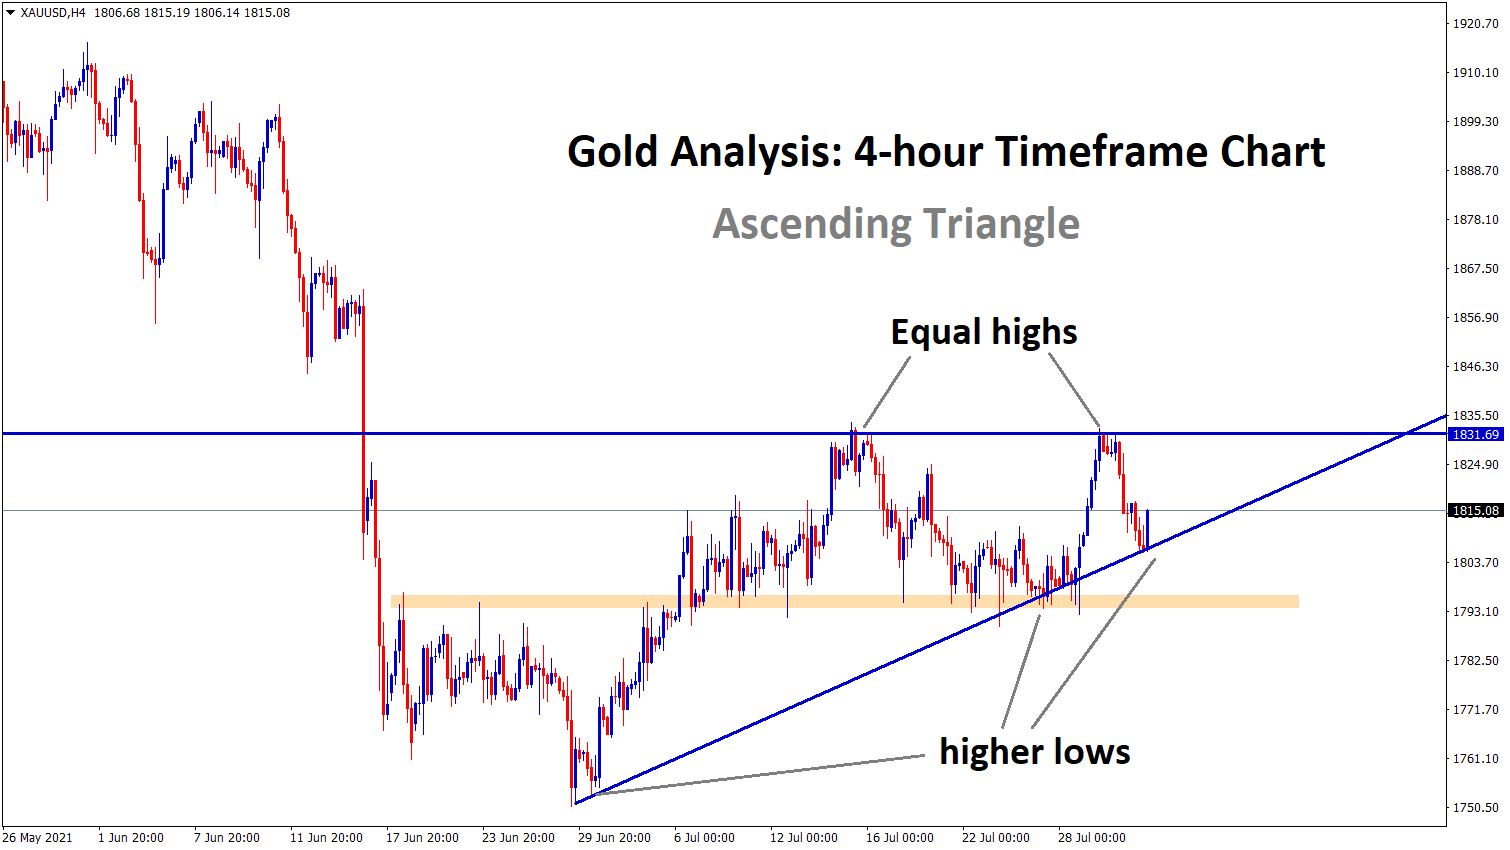 Gold bounces back exactly from the higher low of an Ascending Triangle pattern